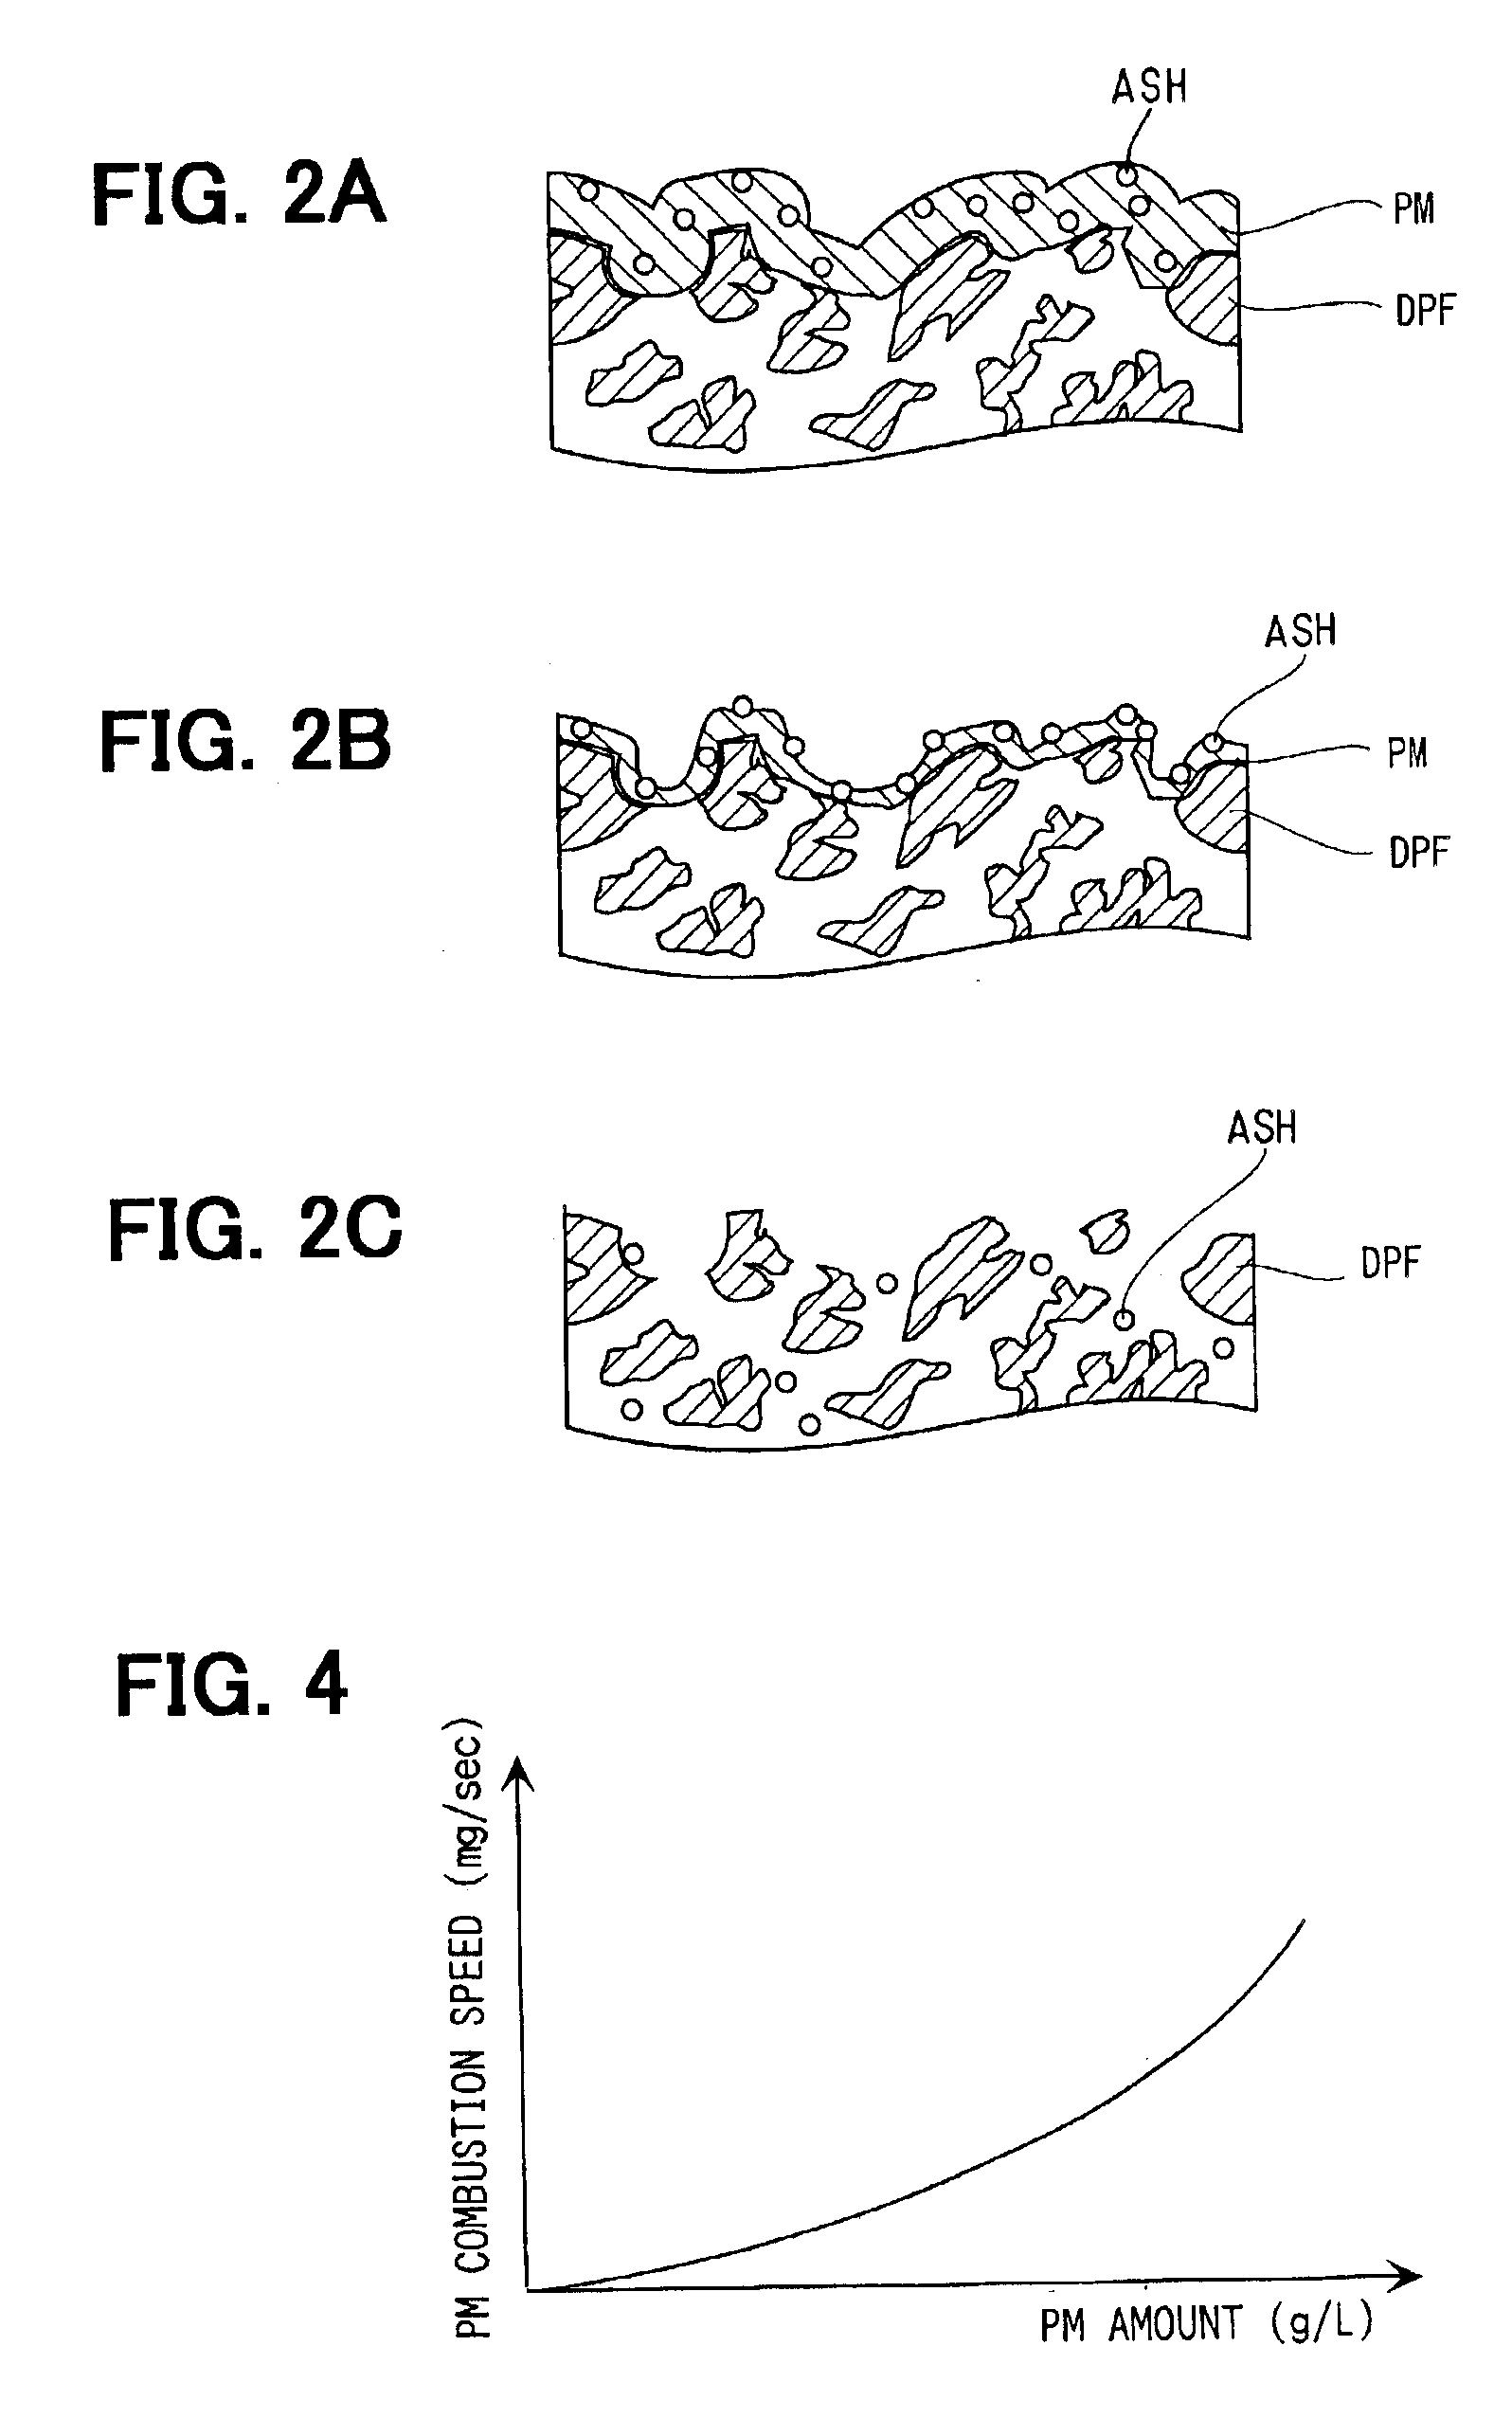 Exhaust gas filter regenerating apparatus effectively burning particulate material